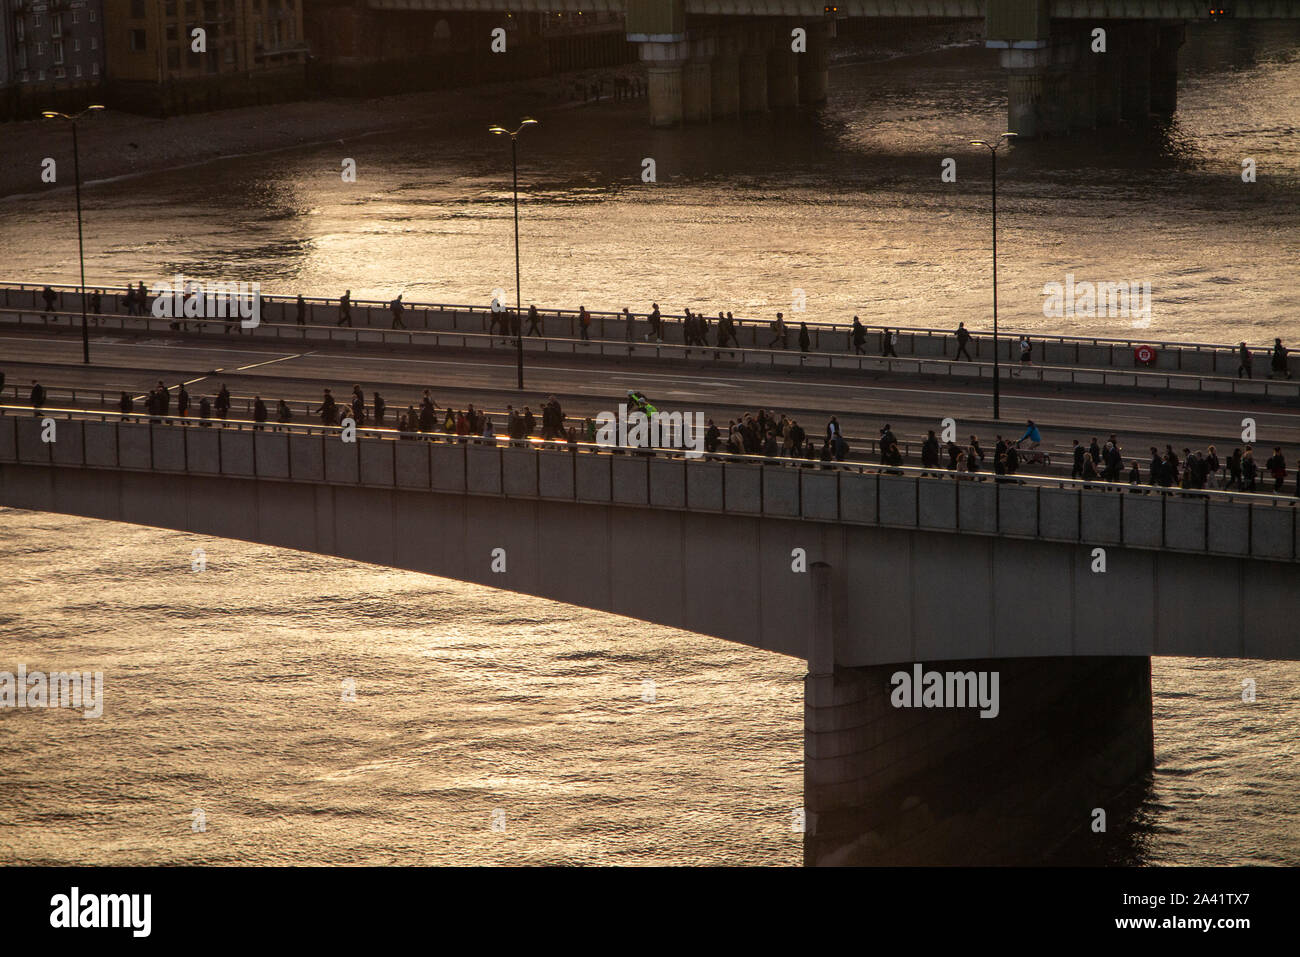 End of the working day and commuters walk over London Bridge as the sun sets Stock Photo